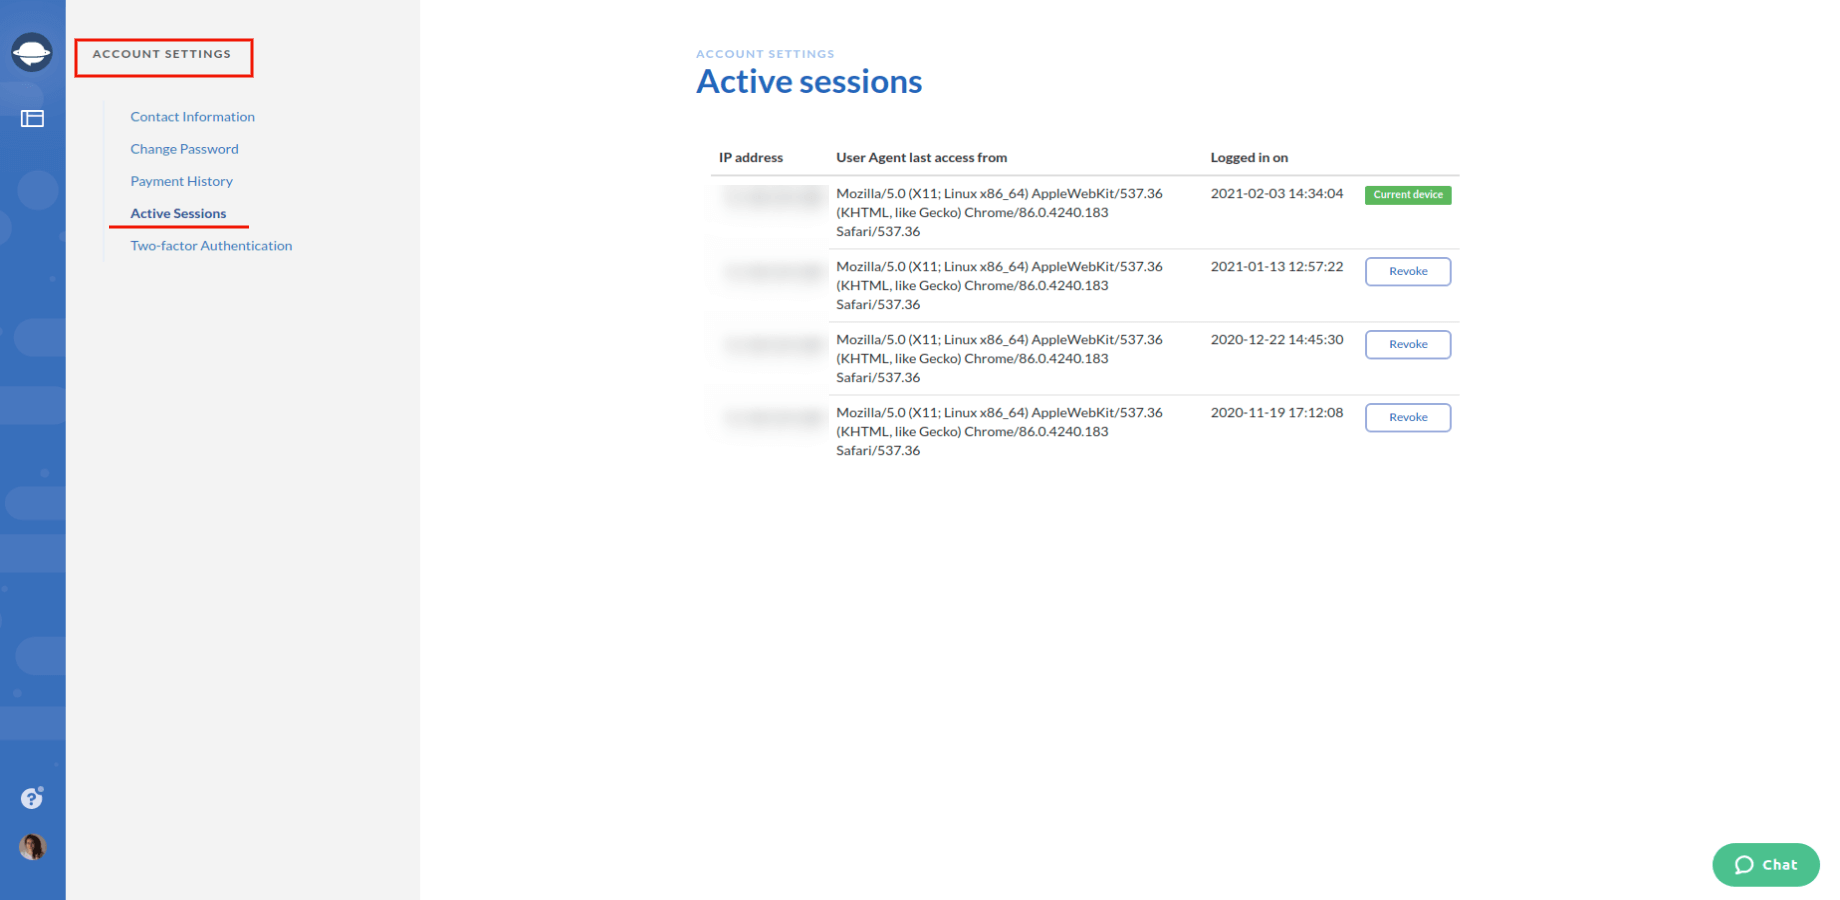 Migration Wizard's Active Sessions